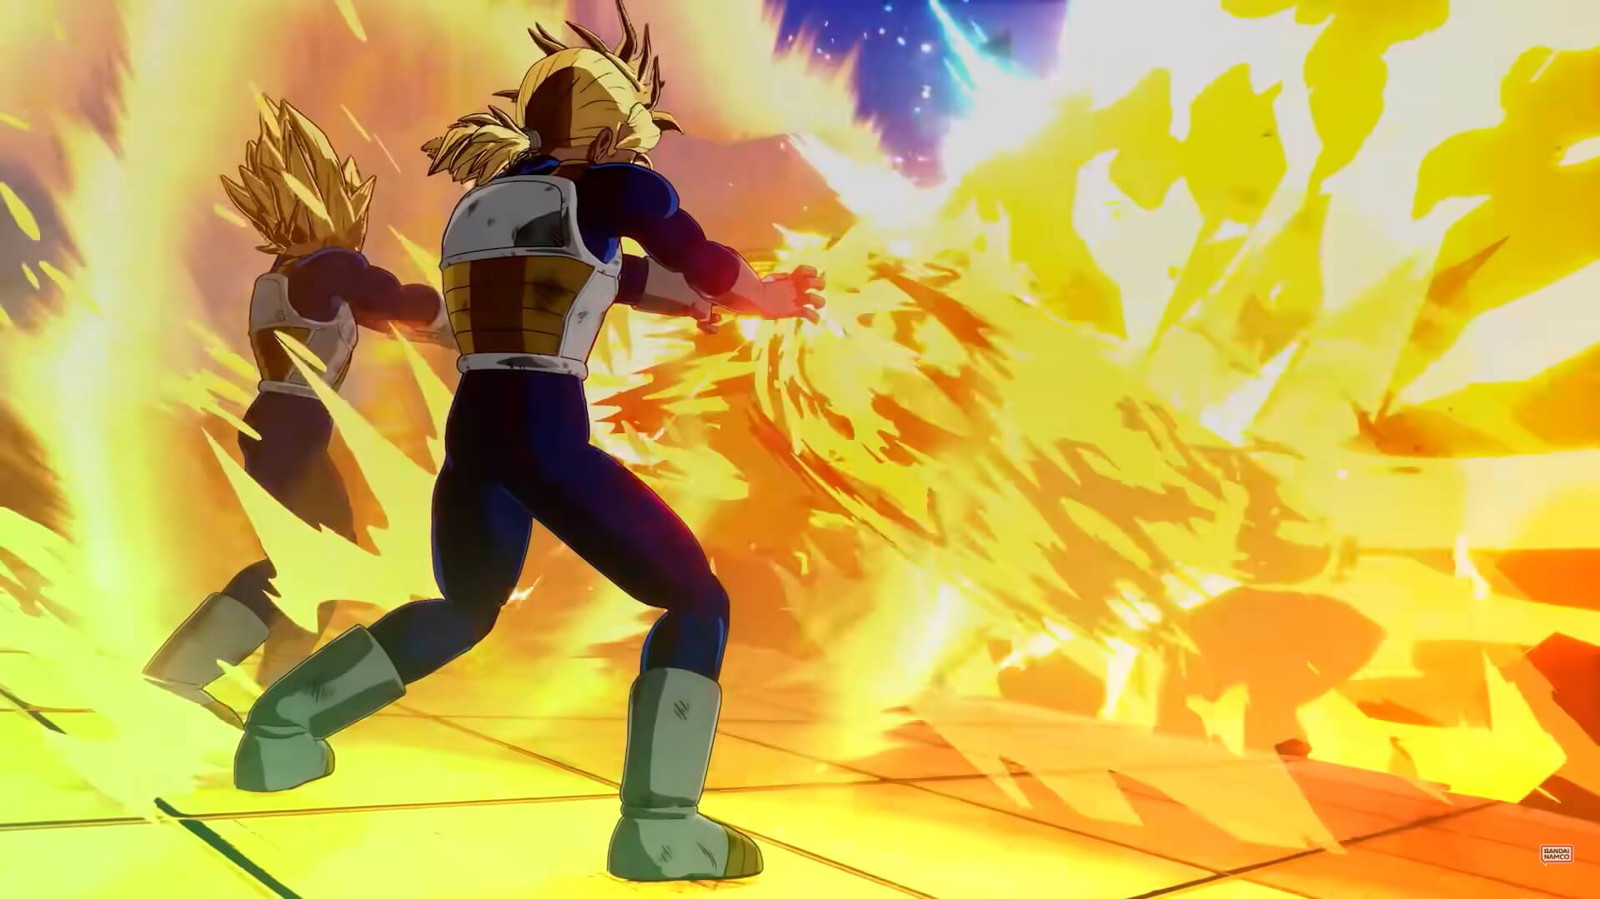 Vegeta and Trunks in an Energy Clash against Perfect Cell in Dragon Ball: Sparking Zero. Credits: Bandai Namco